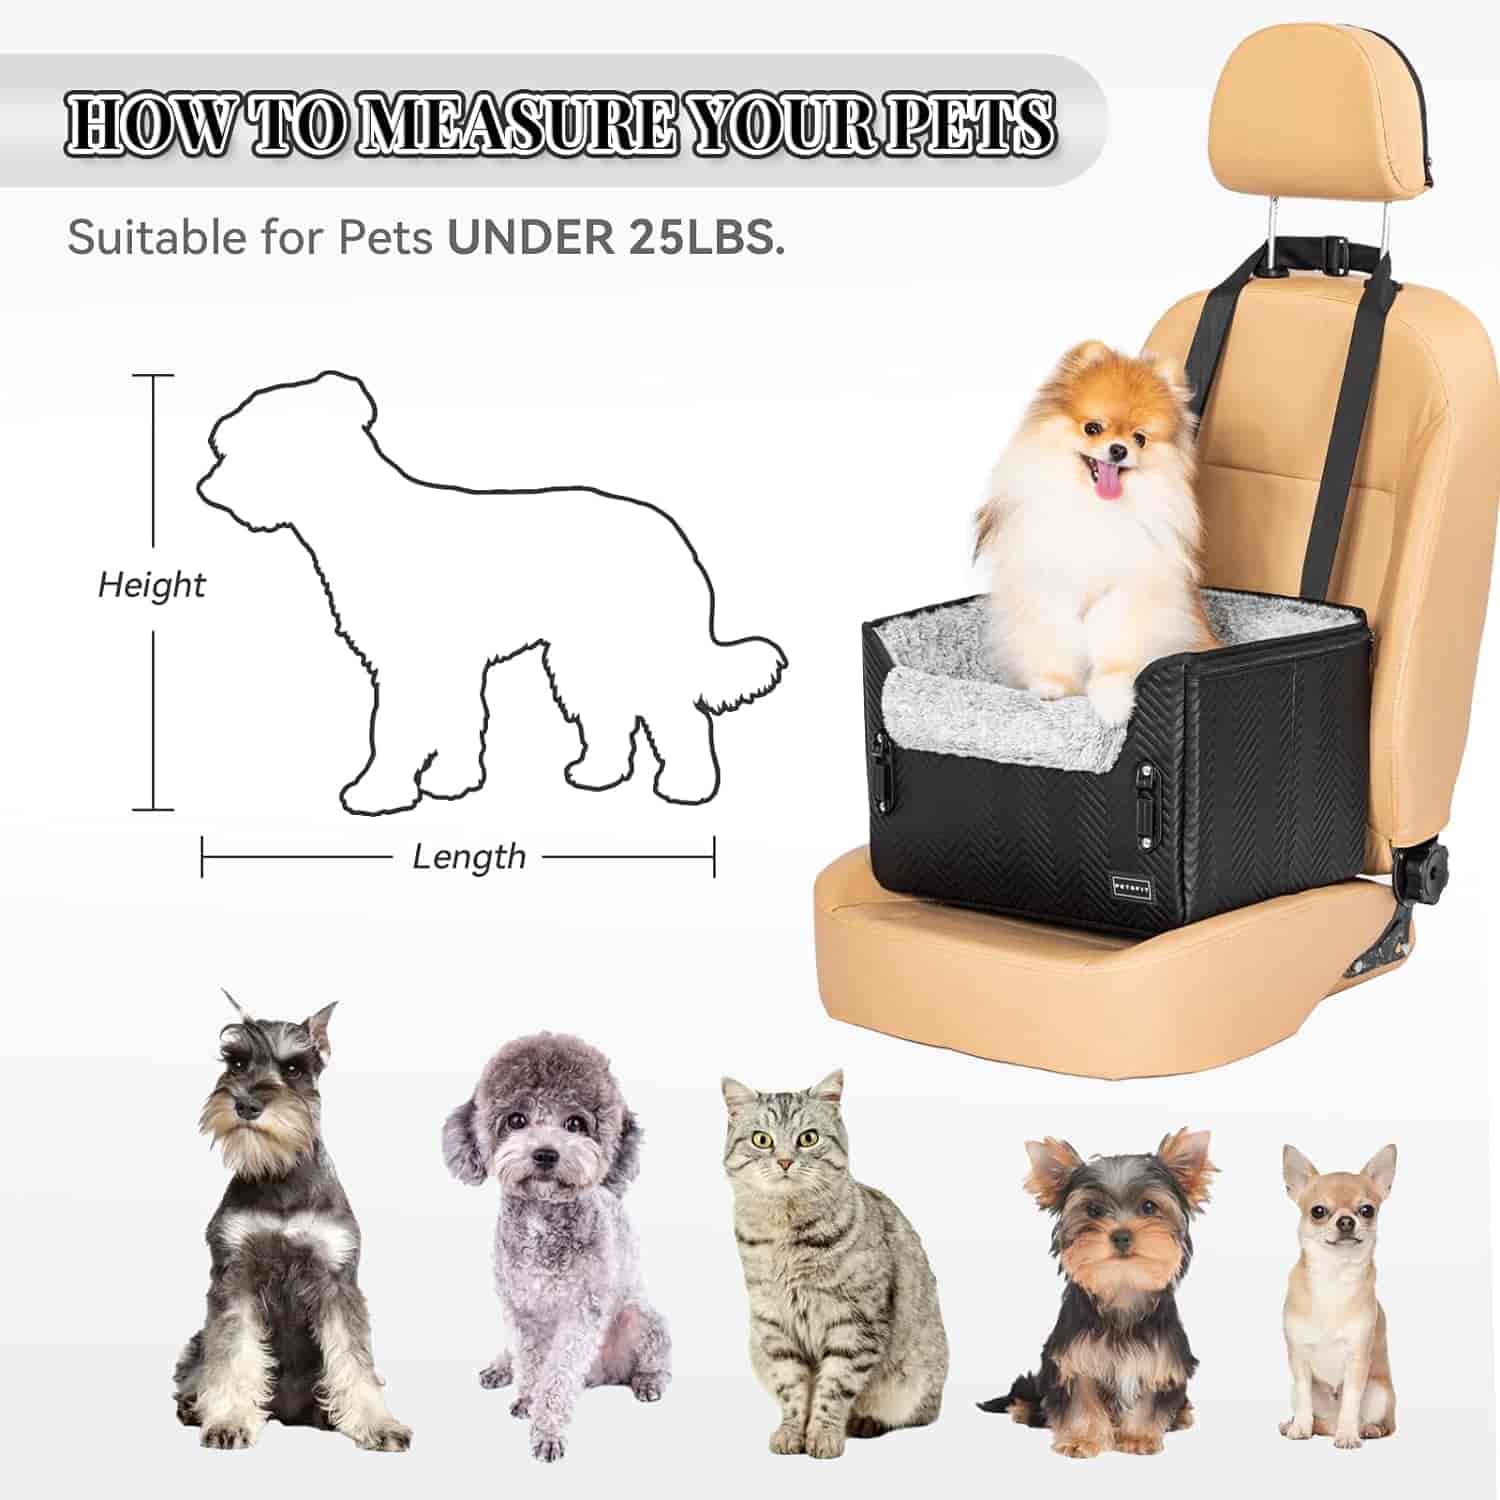 PETSFIT Dog Car Seat, Waterproof PU Leather Dog Carseat with Patent Safe Buckles, Clip-On Leash, Pet Travel Carrier Bed for Small Pets Up to 25lbs